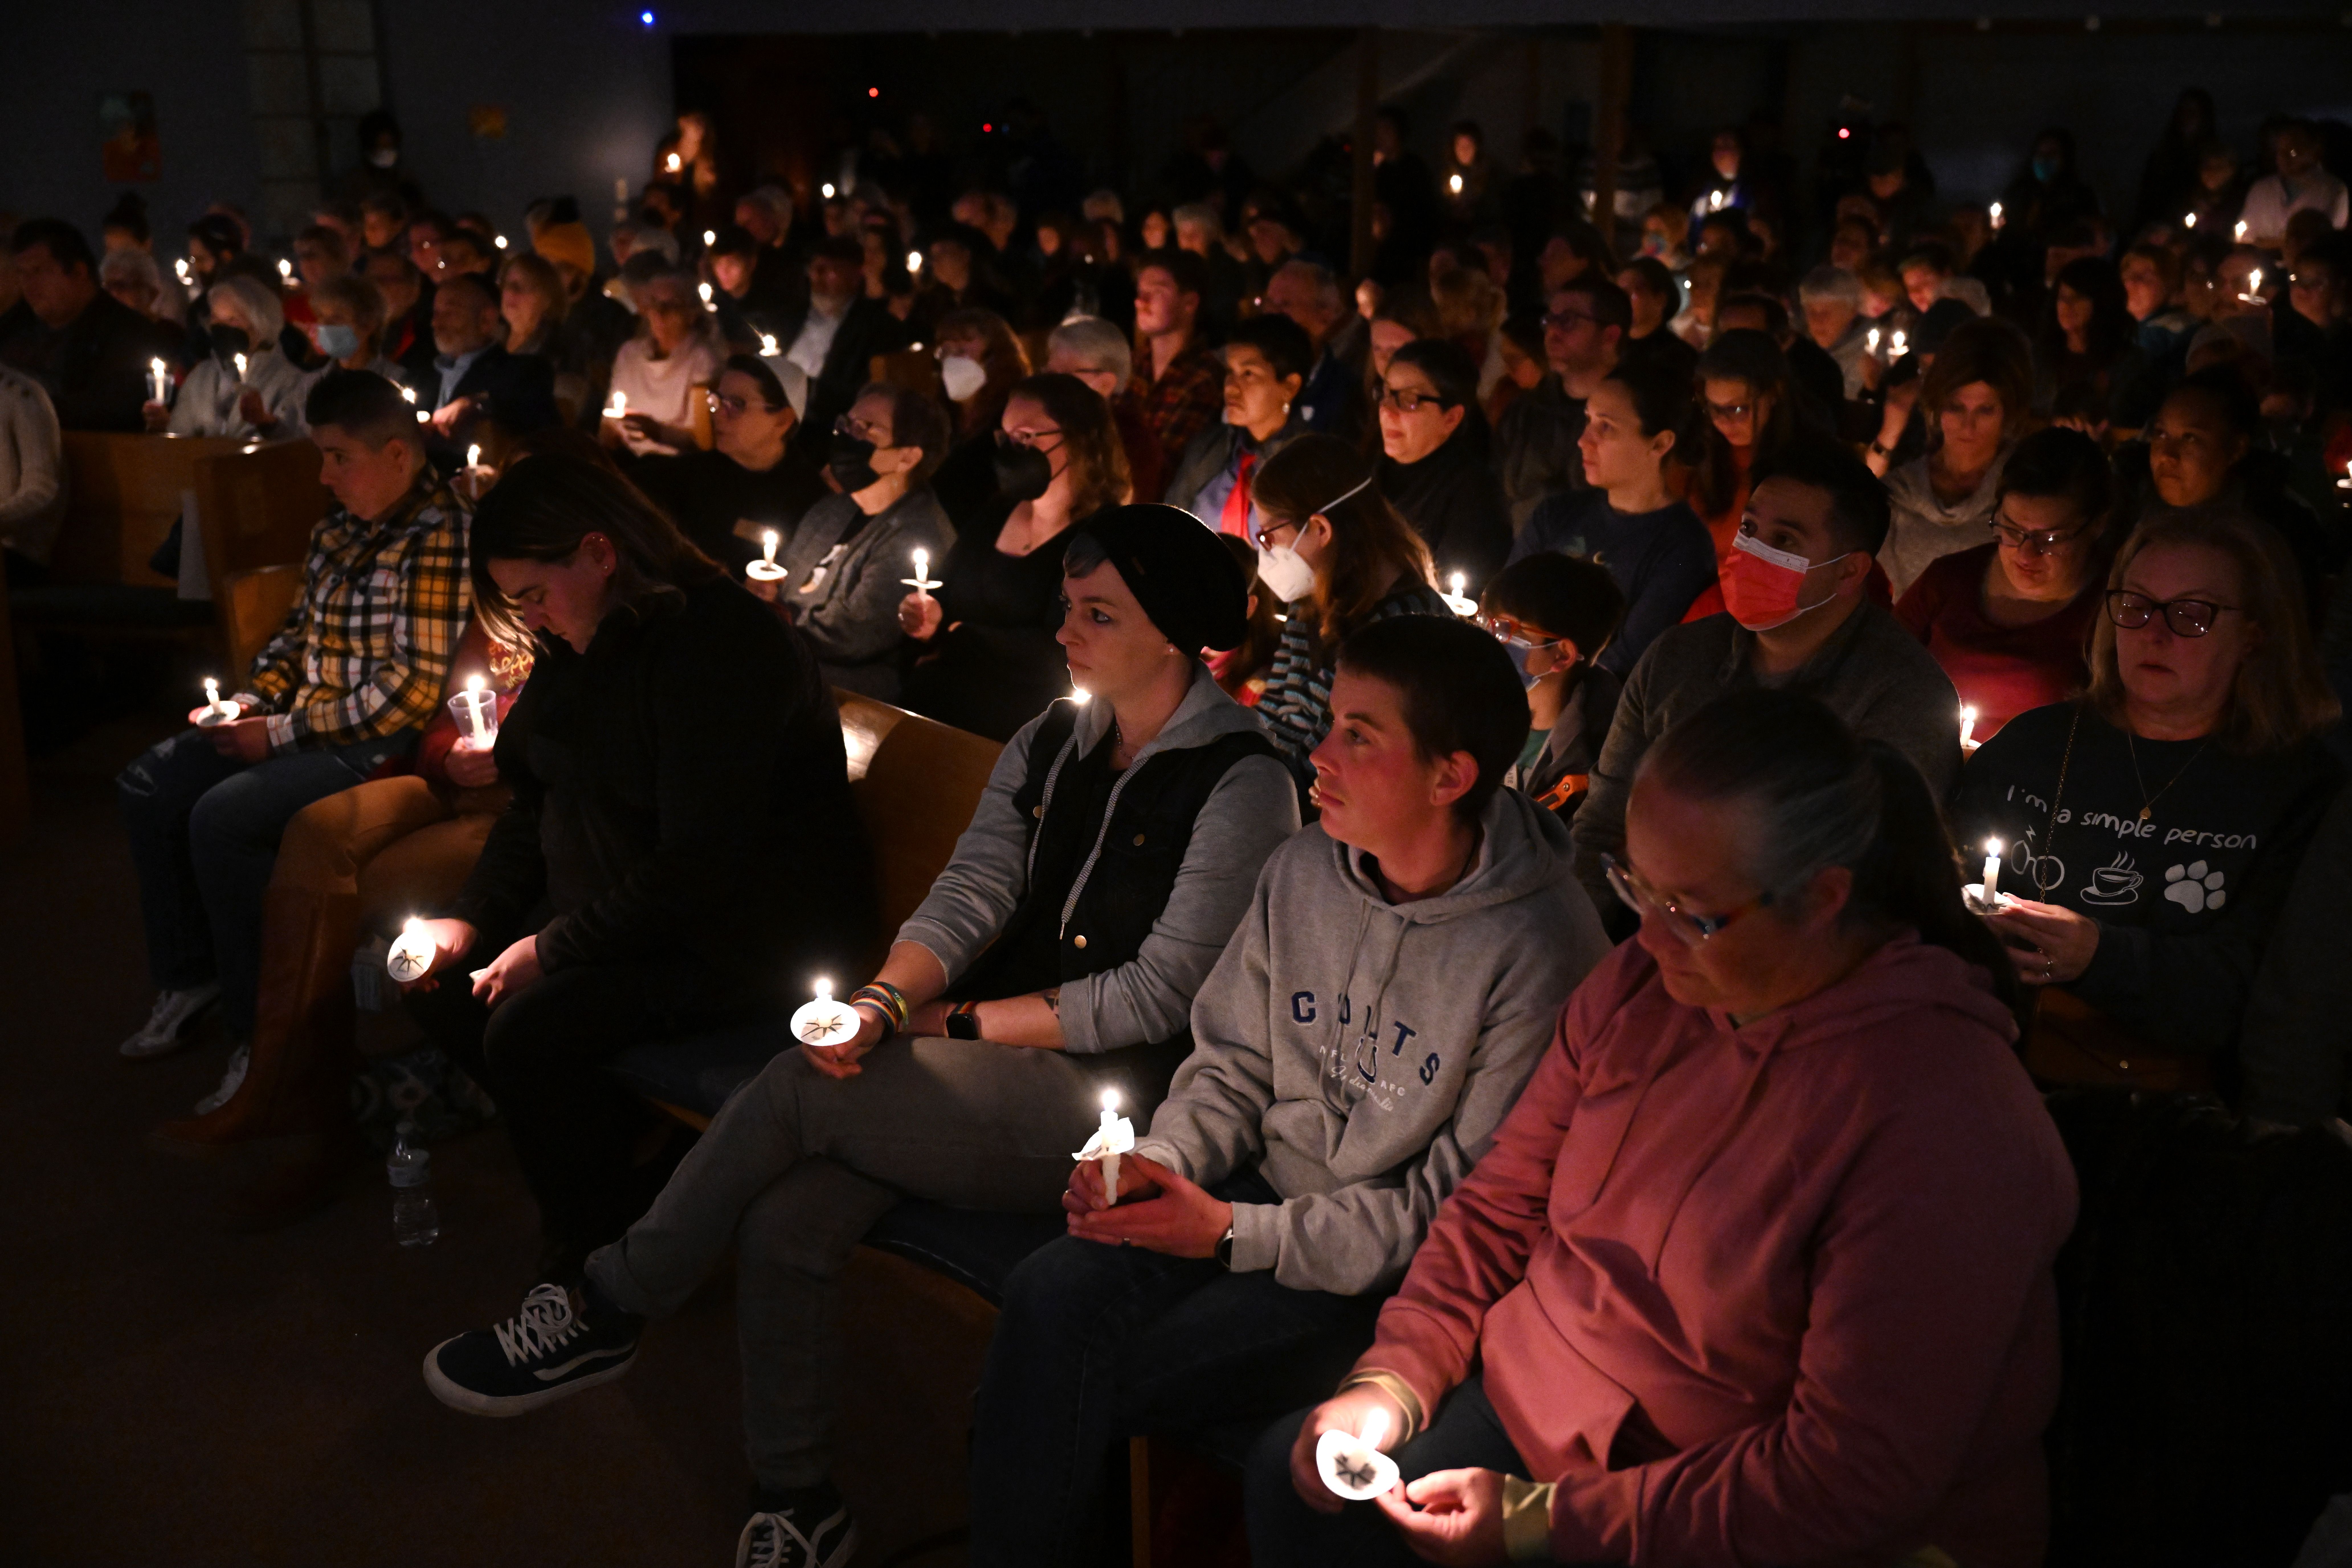 Mourners hold candles during a candlelight vigil and interfaith service for mass shooting victims in Colorado Springs, Colorado